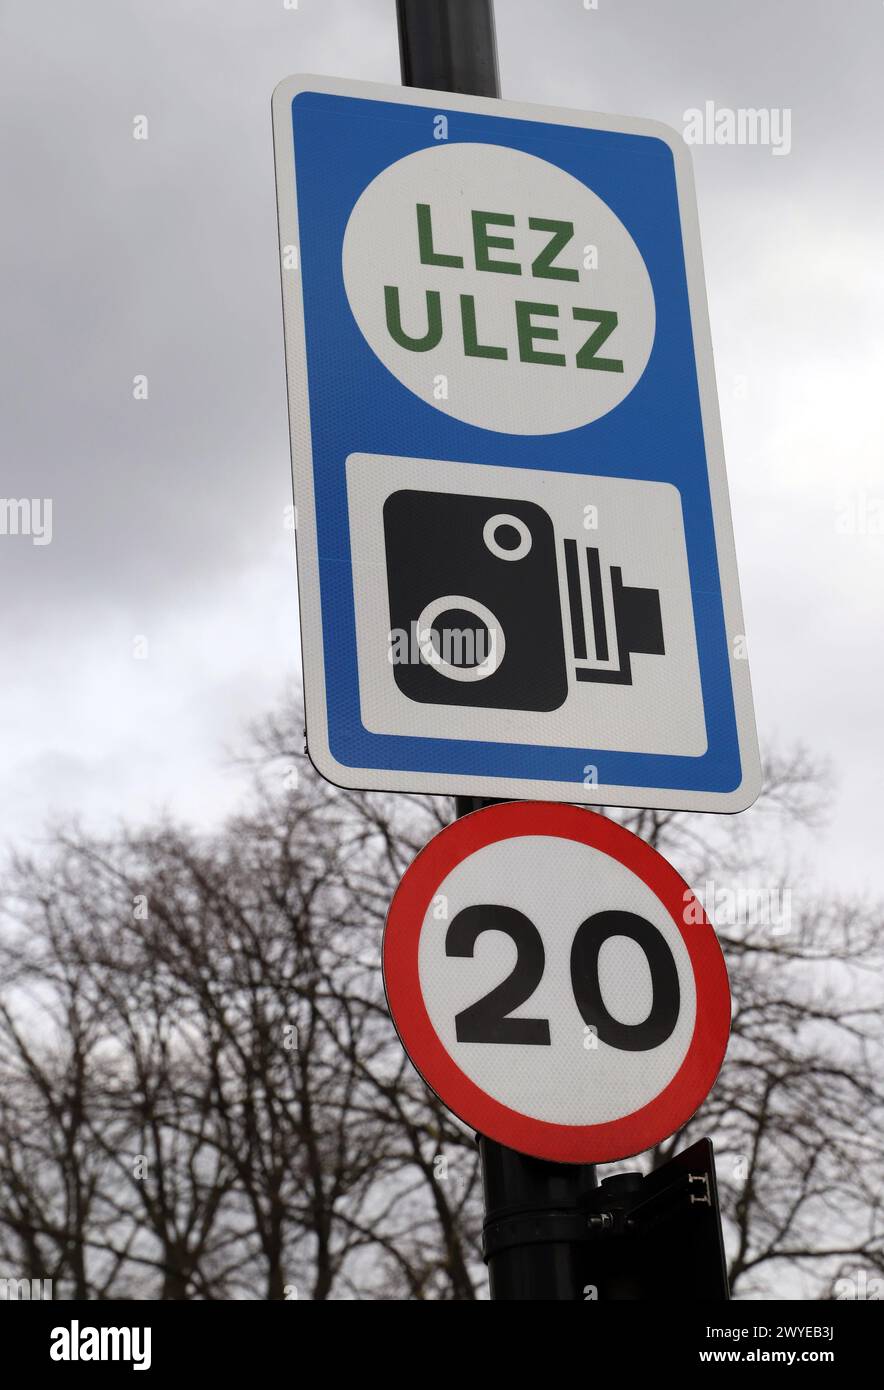 LEZ/ULEZ and 20 mph signs in London, England. Stock Photo